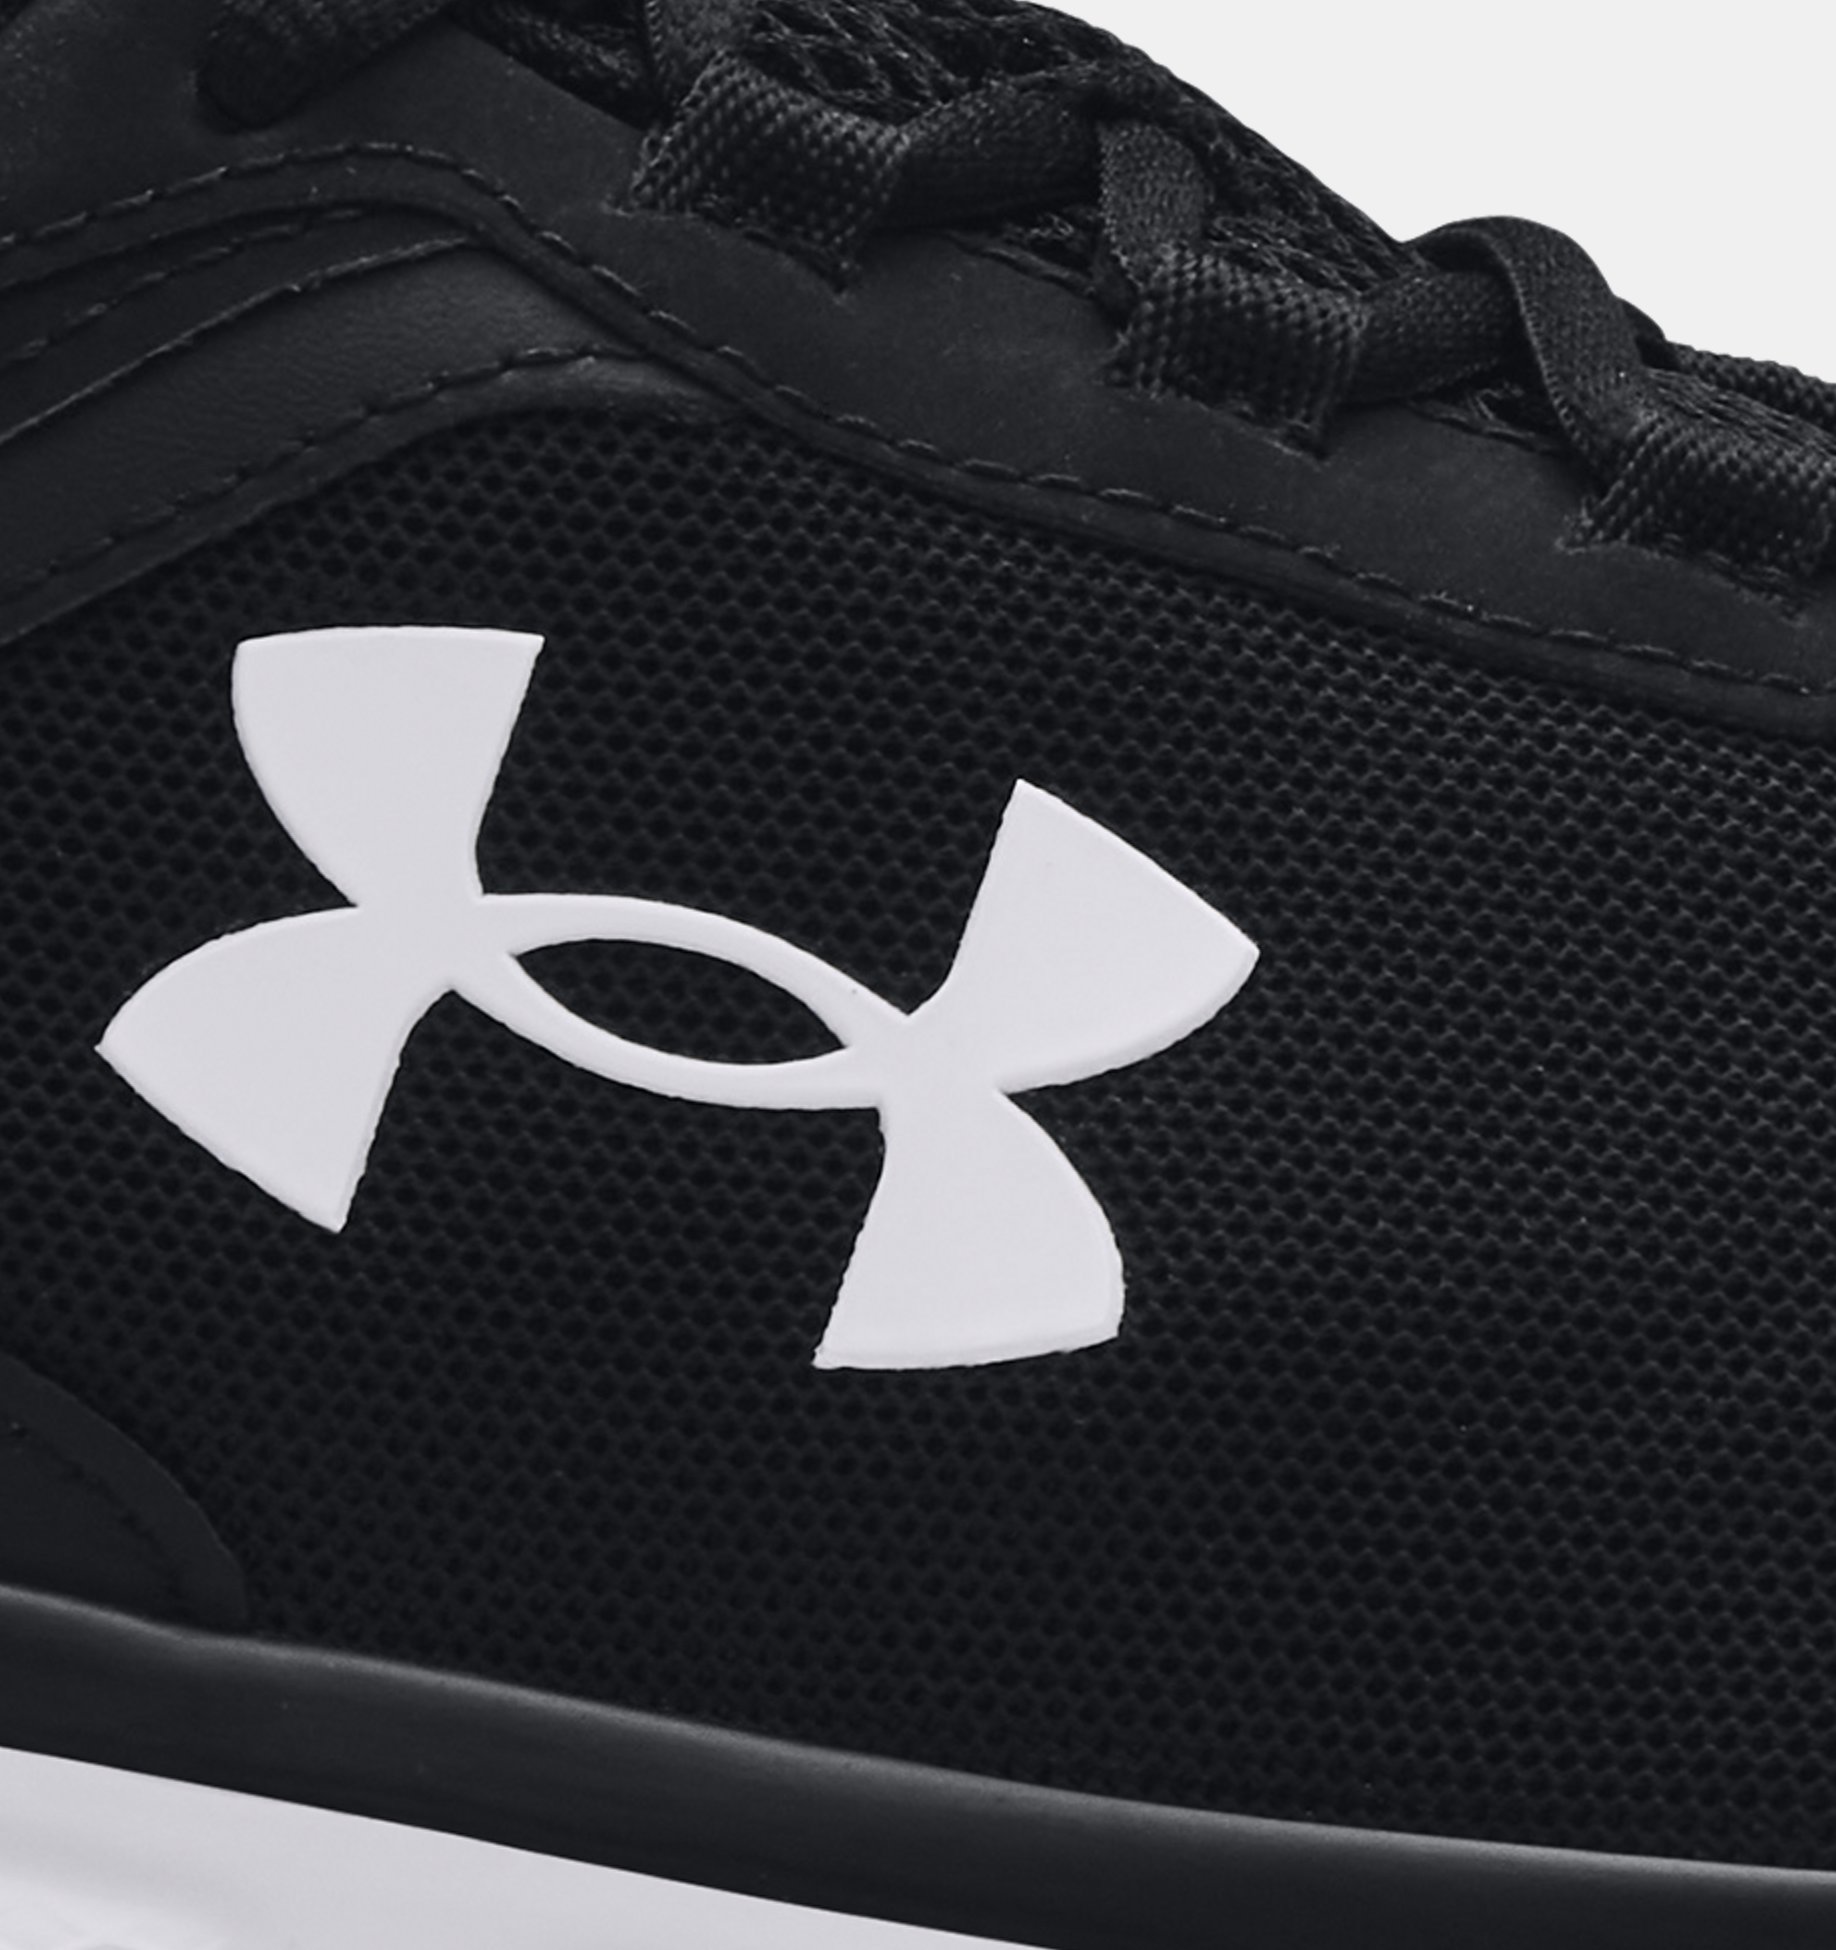 Are Under Armour Shoes Wide?